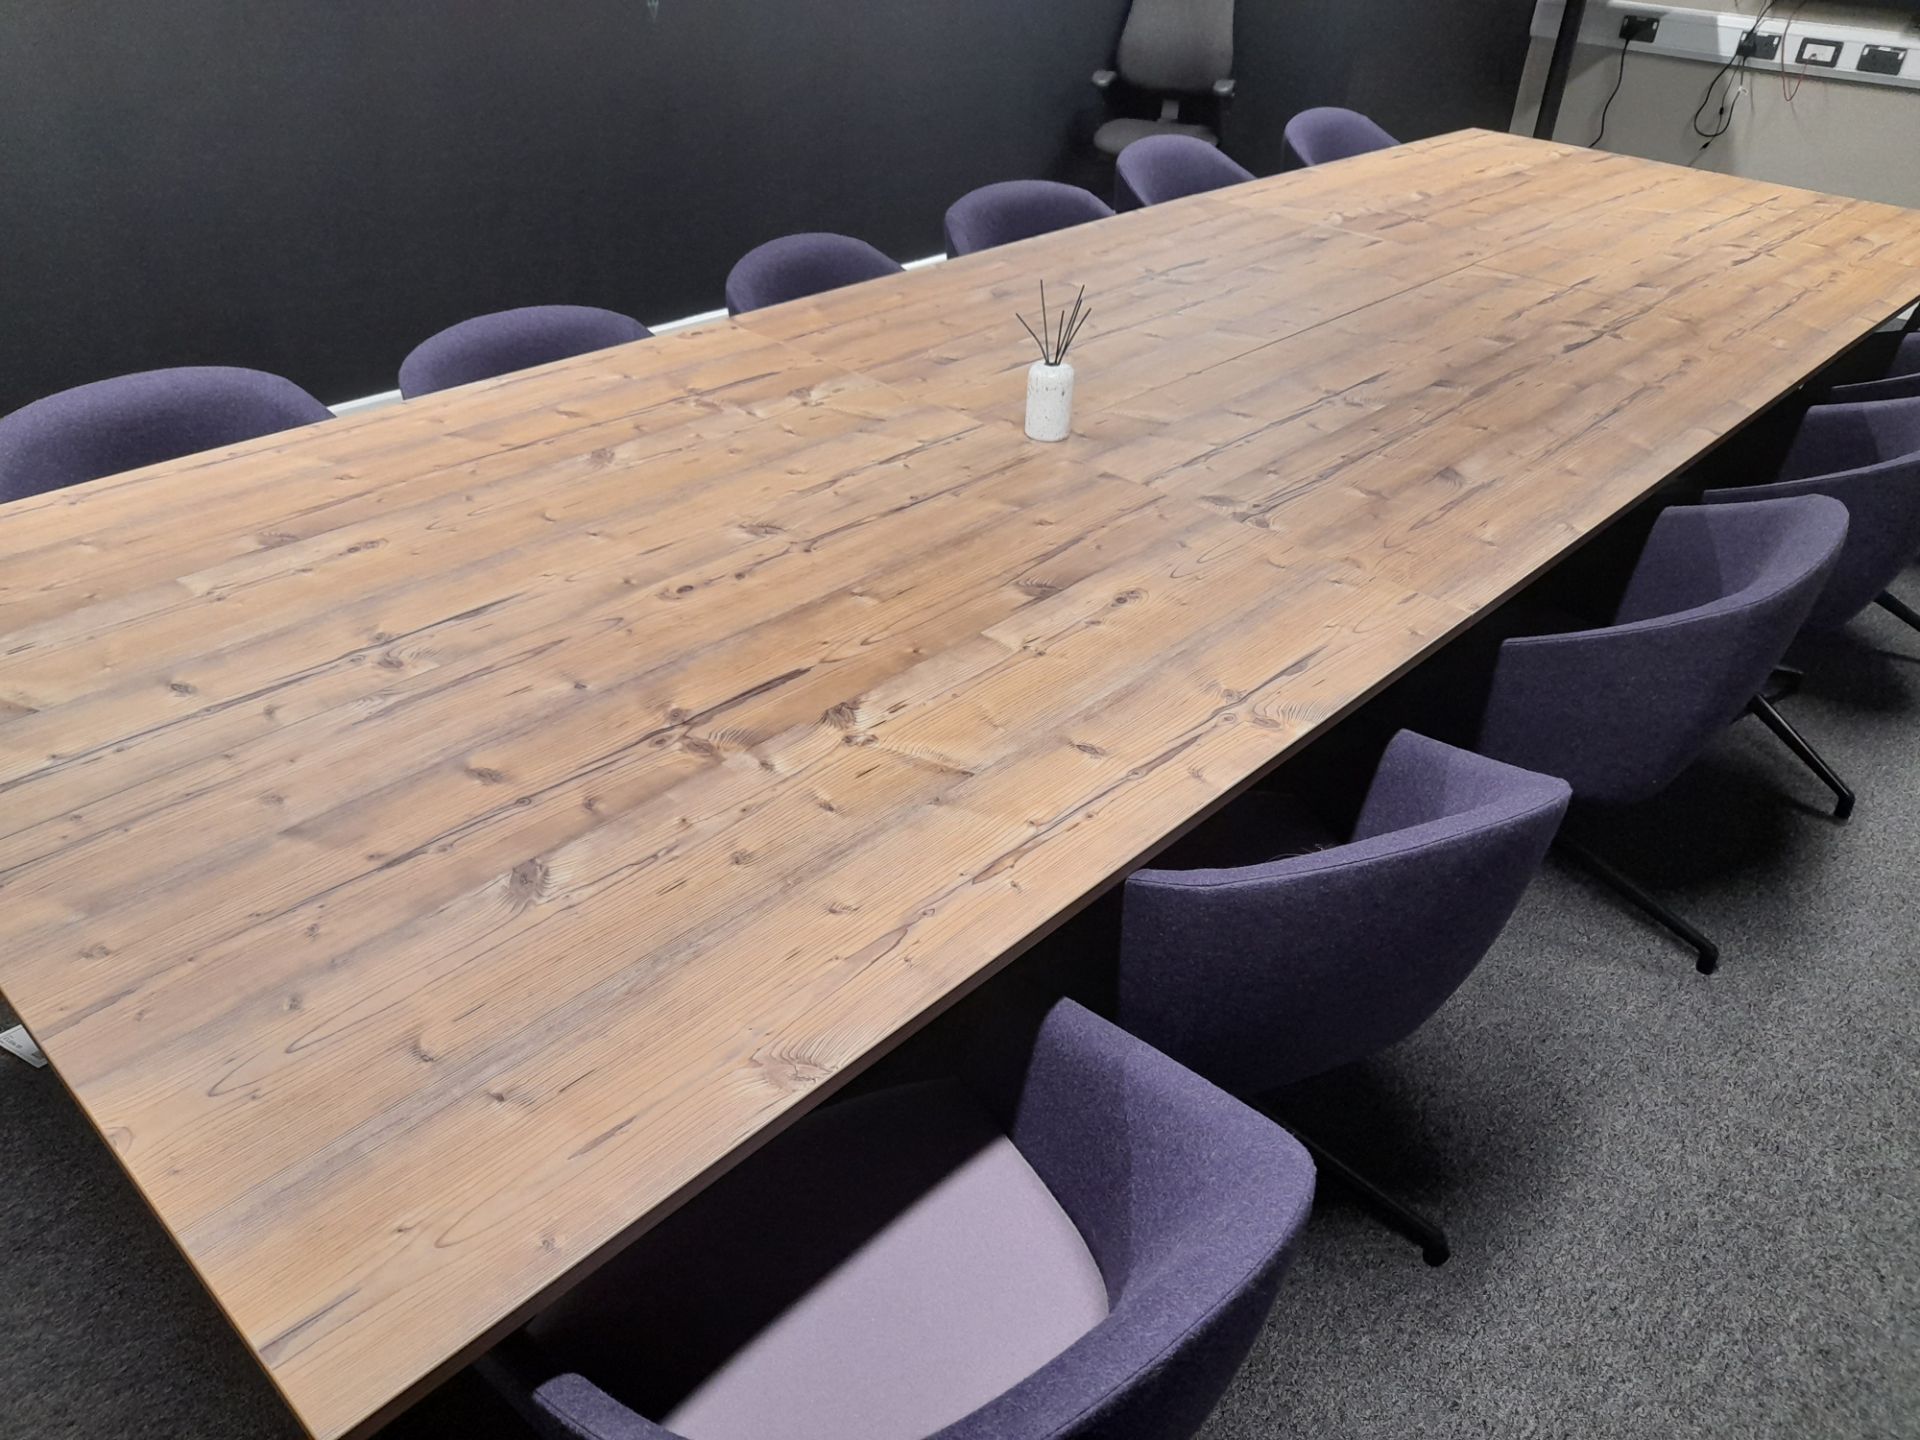 6 x Section boardroom table (Approx. 1600 x 800), with 12 x Swivel tub chairs, located to - Image 6 of 6